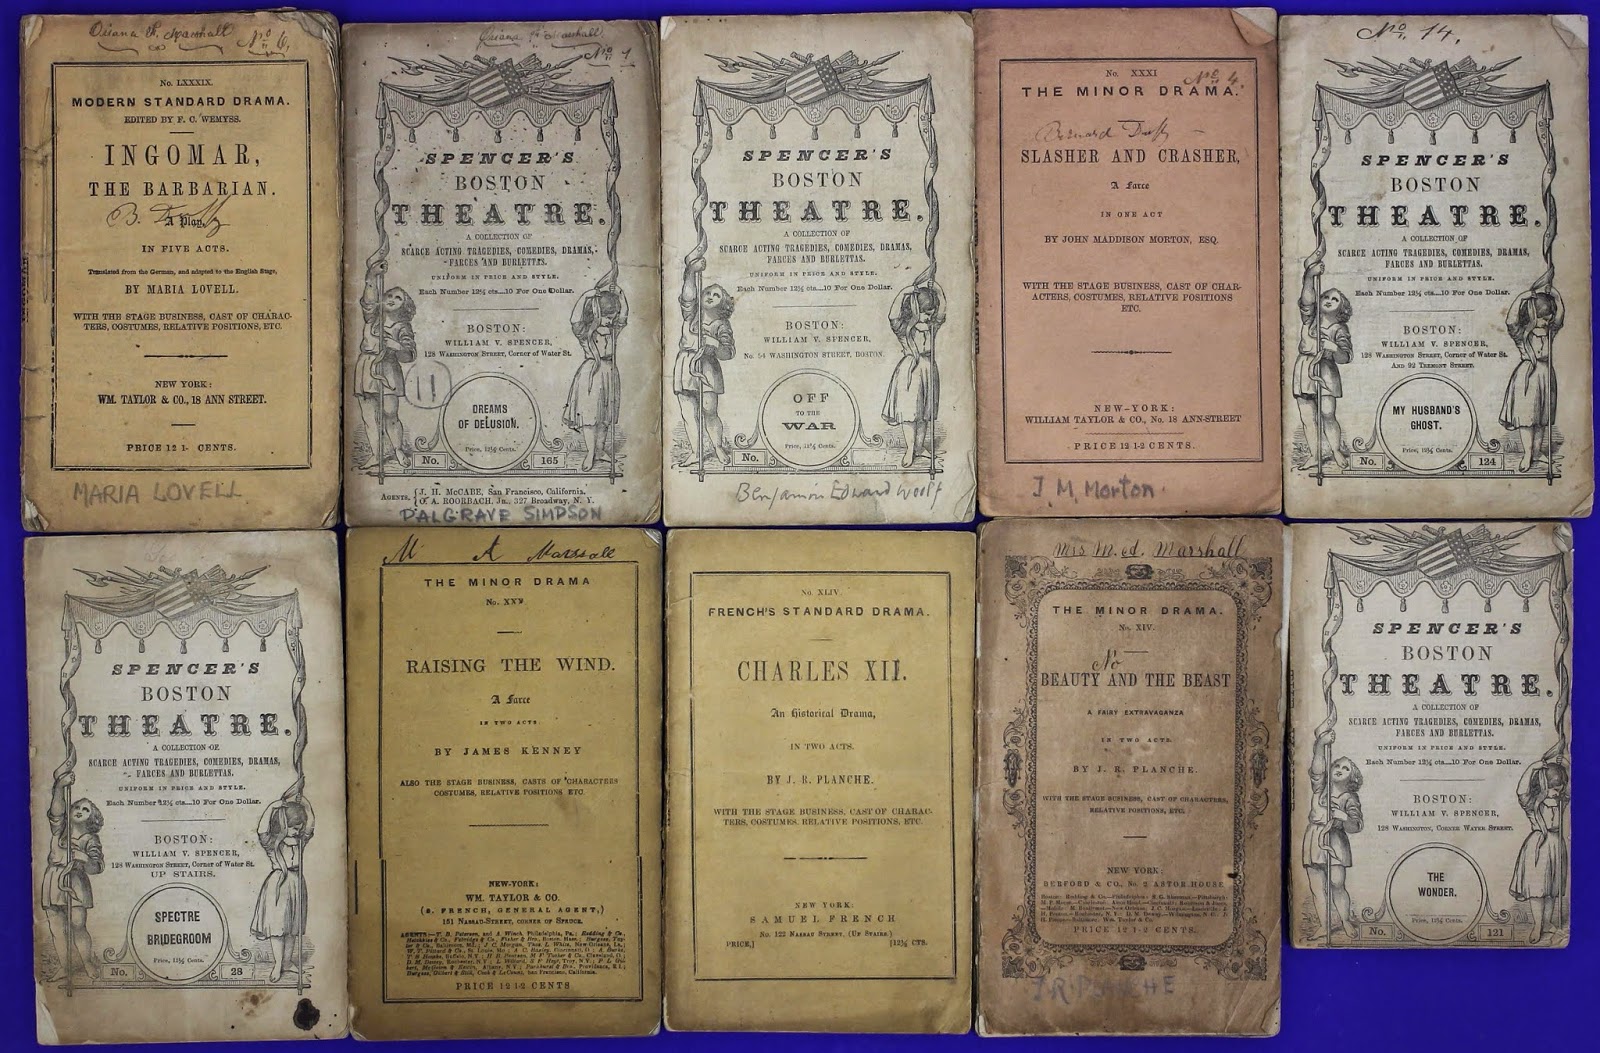 A Selection of the playbooks in Special Collections